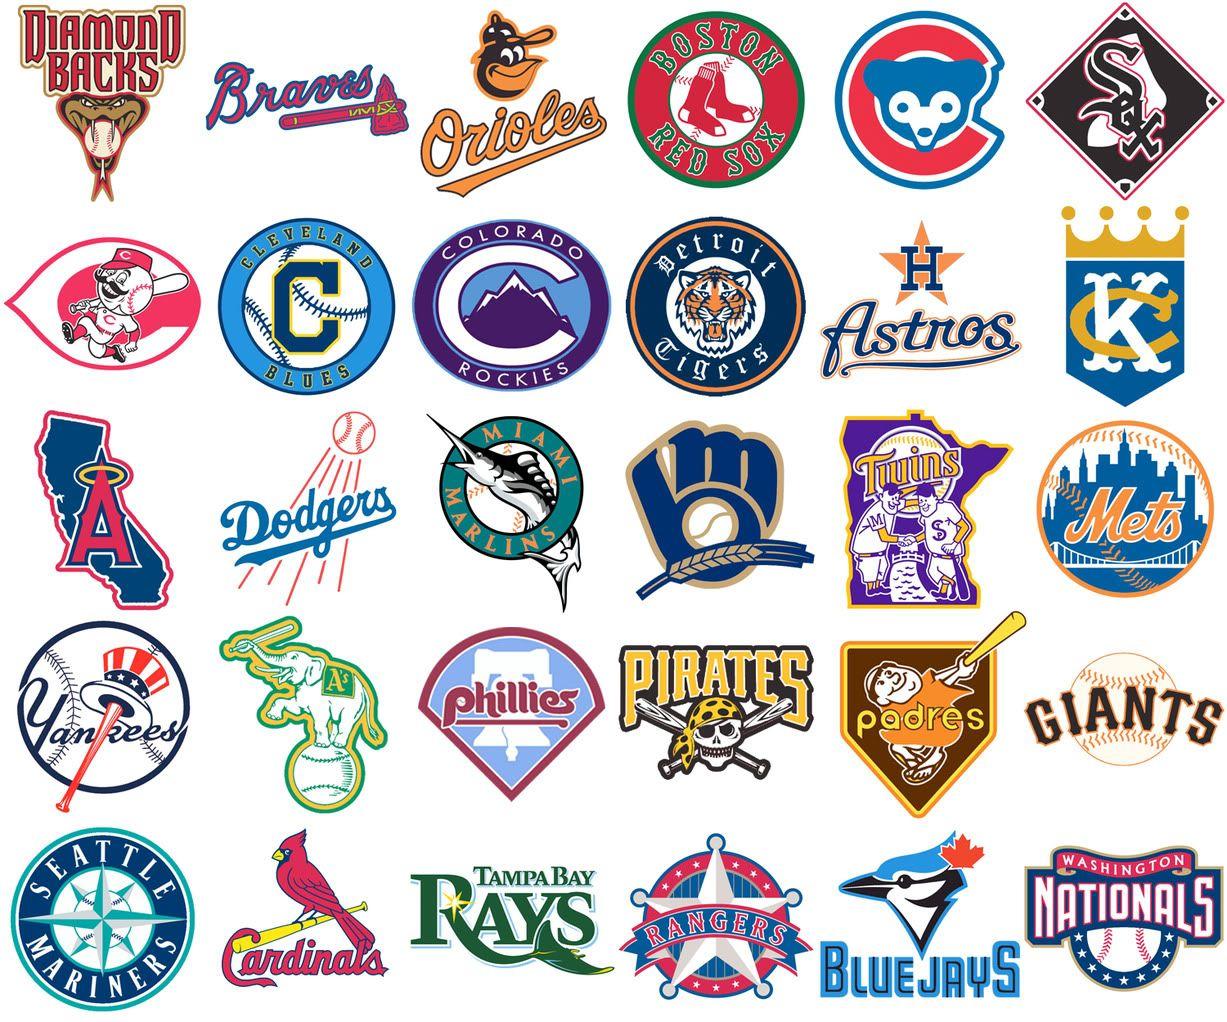 Old MLB Logo - What the MLB primary logos should be - Concepts - Chris Creamer's ...